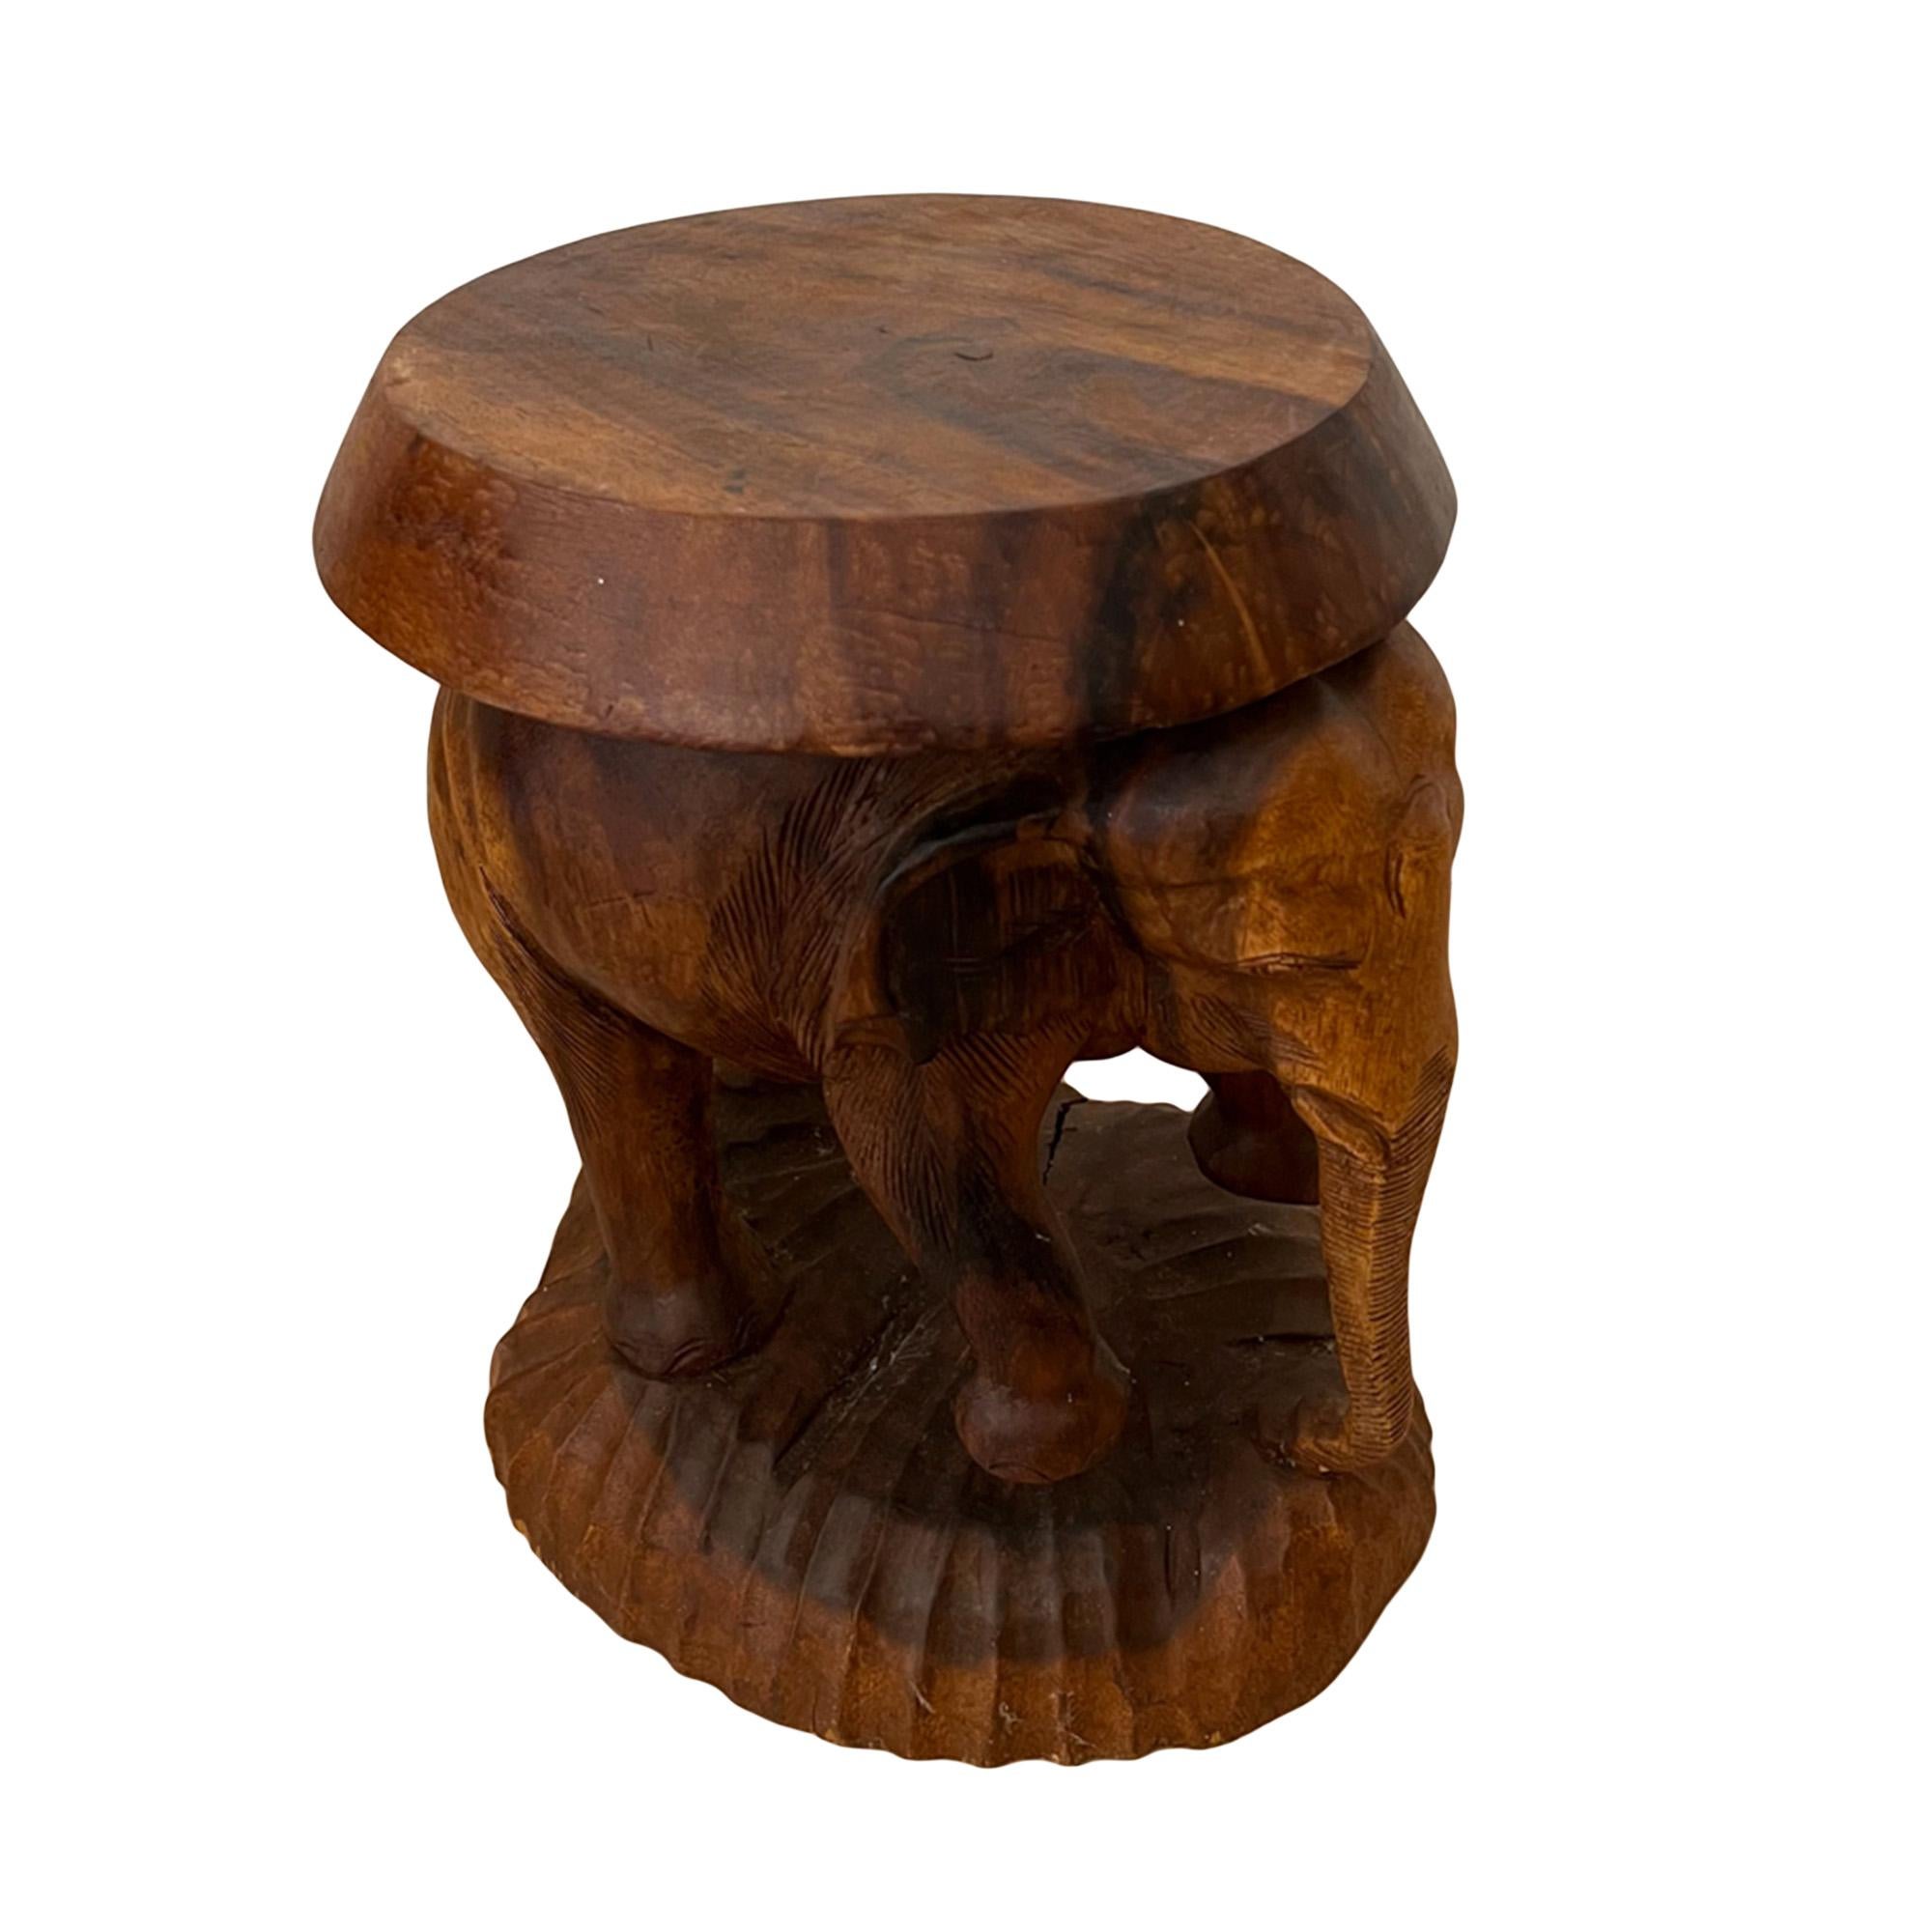 This quirky side table was carved from padauk wood in Ceylon in the 1950s. 

Please take a look at all the pictures to see the detail of the charming elephant - decorative and practical!

This elephant is standing on a carved wood base.